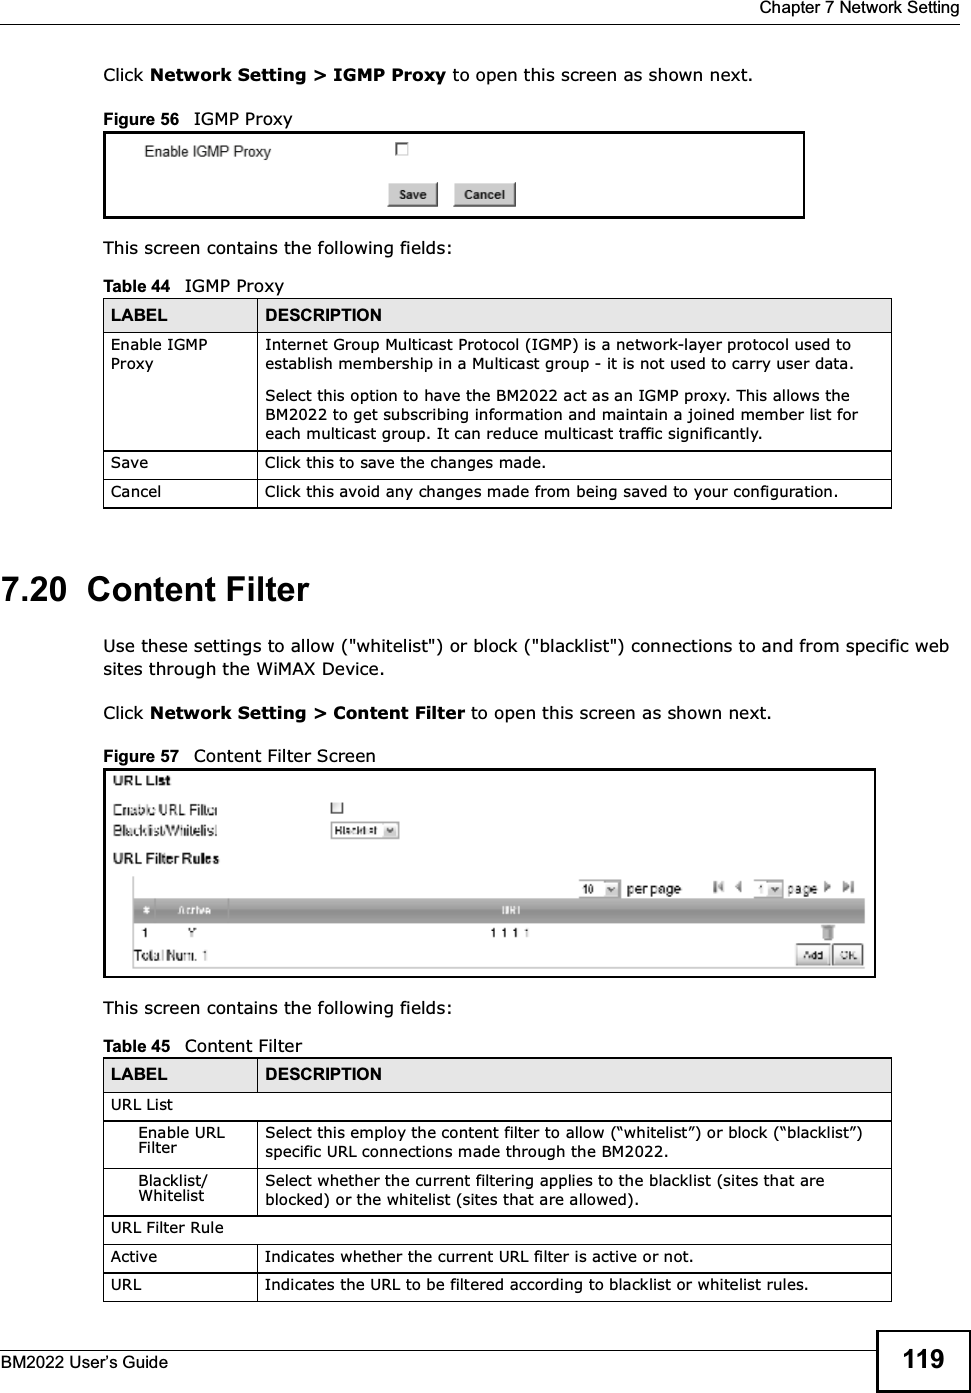  Chapter 7 Network SettingBM2022 Users Guide 119Click Network Setting &gt; IGMP Proxy to open this screen as shown next.Figure 56   IGMP ProxyThis screen contains the following fields:7.20  Content FilterUse these settings to allow (&quot;whitelist&quot;) or block (&quot;blacklist&quot;) connections to and from specific web sites through the WiMAX Device.Click Network Setting &gt; Content Filter to open this screen as shown next.Figure 57   Content Filter ScreenThis screen contains the following fields:Table 44   IGMP ProxyLABEL DESCRIPTIONEnable IGMP ProxyInternet Group Multicast Protocol (IGMP) is a network-layer protocol used to establish membership in a Multicast group - it is not used to carry user data.Select this option to have the BM2022 act as an IGMP proxy. This allows the BM2022 to get subscribing information and maintain a joined member list for each multicast group. It can reduce multicast traffic significantly.Save Click this to save the changes made.Cancel Click this avoid any changes made from being saved to your configuration.Table 45   Content FilterLABEL DESCRIPTIONURL ListEnable URL FilterSelect this employ the content filter to allow (whitelist) or block (blacklist) specific URL connections made through the BM2022.Blacklist/WhitelistSelect whether the current filtering applies to the blacklist (sites that are blocked) or the whitelist (sites that are allowed).URL Filter RuleActive Indicates whether the current URL filter is active or not.URL Indicates the URL to be filtered according to blacklist or whitelist rules.